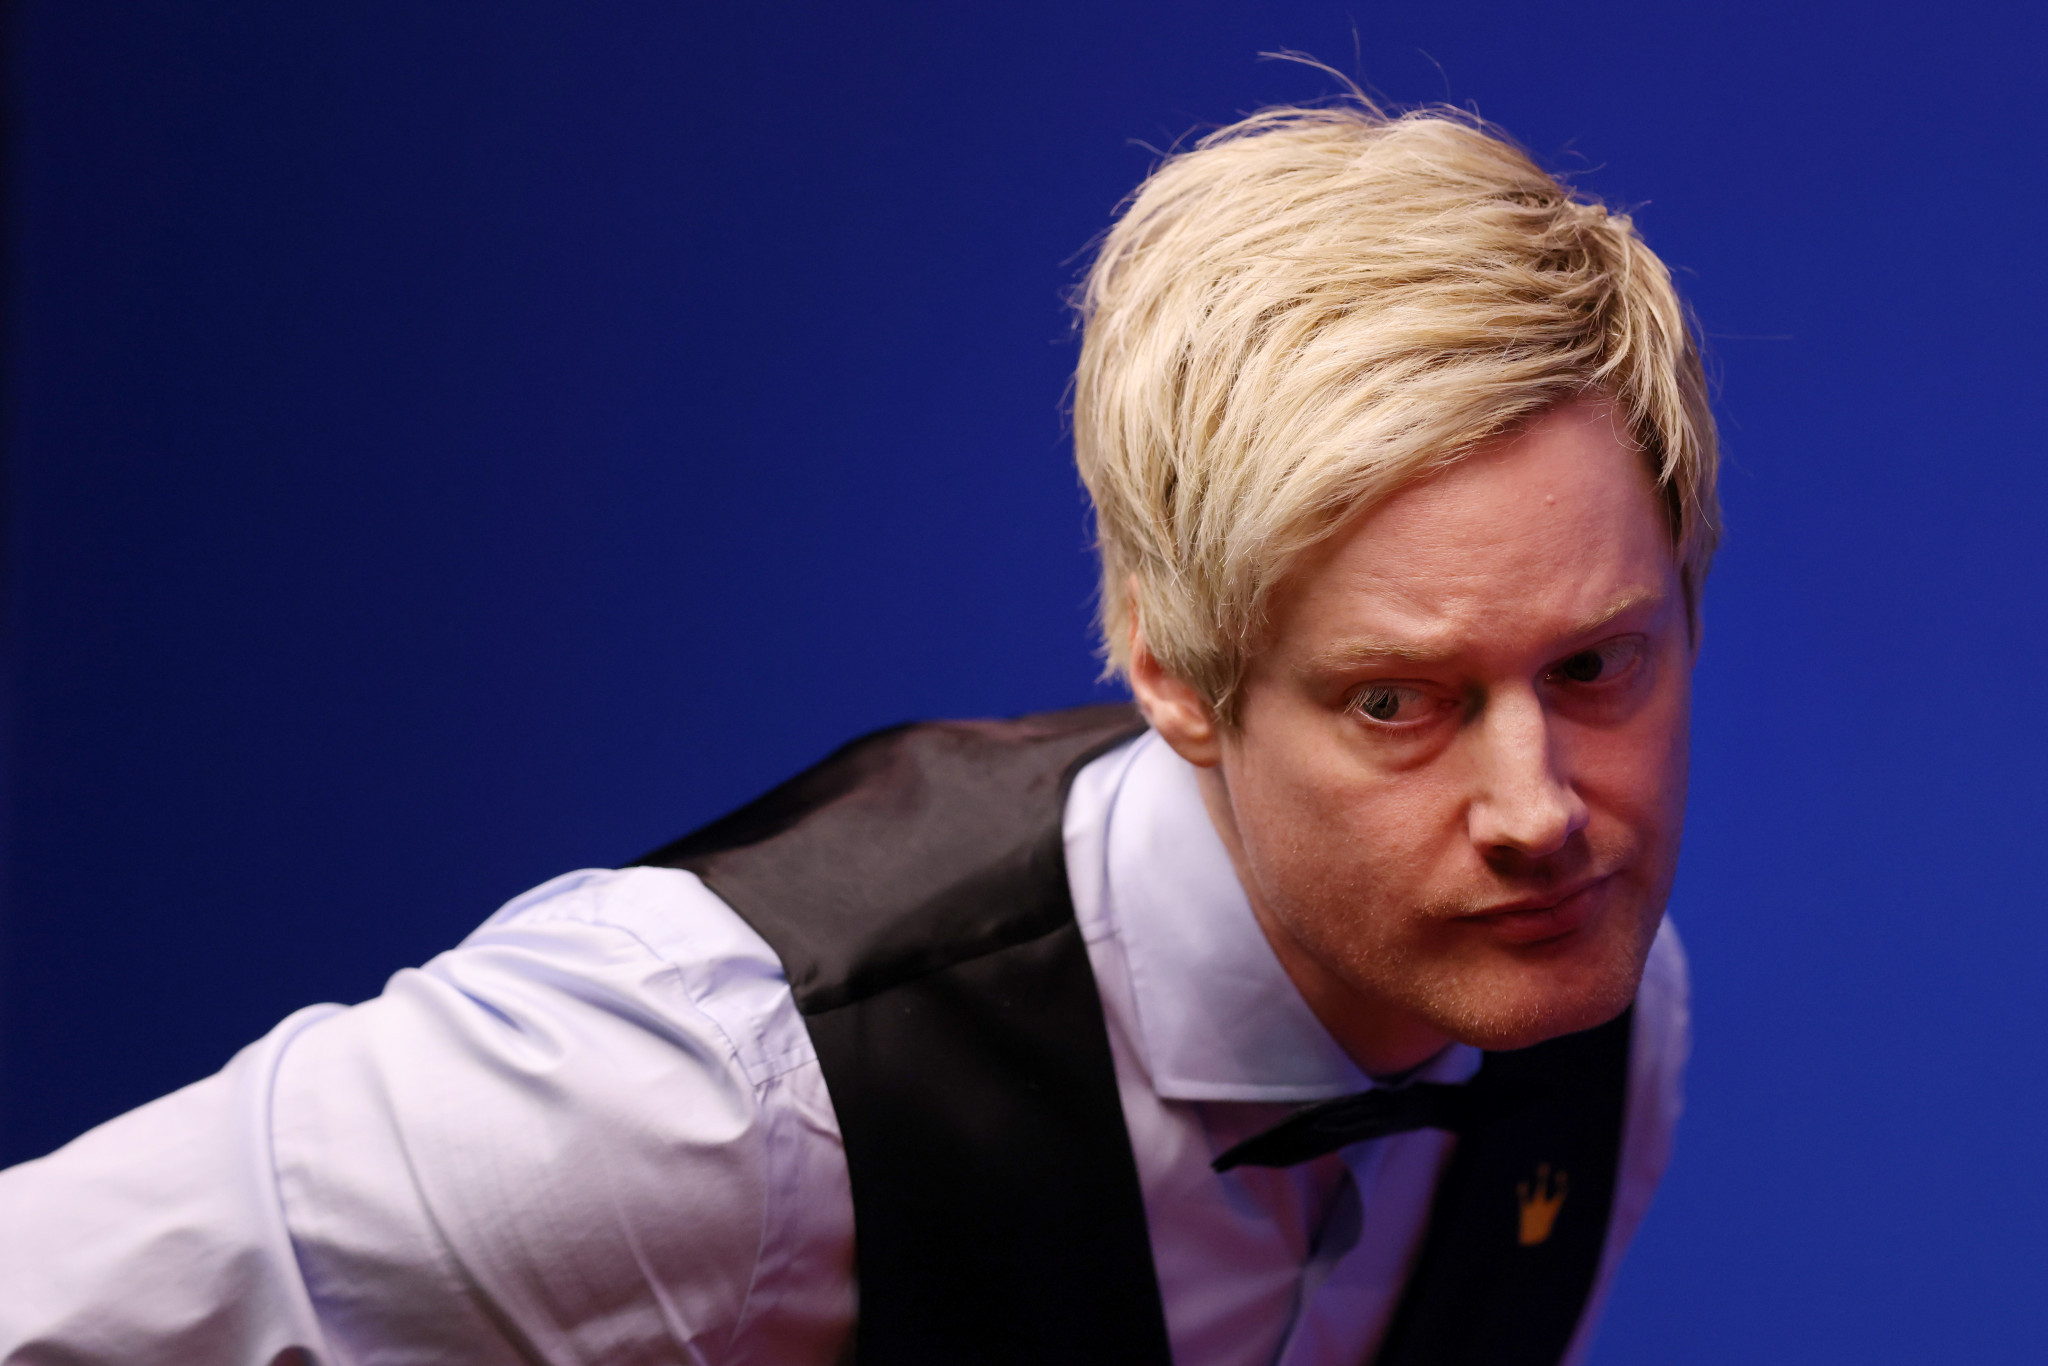 Pre-tournament favourite Neil Robertson trails 9-7 to Jack Lisowski after two sessions of their World Snooker Championship second round match ©Getty Images